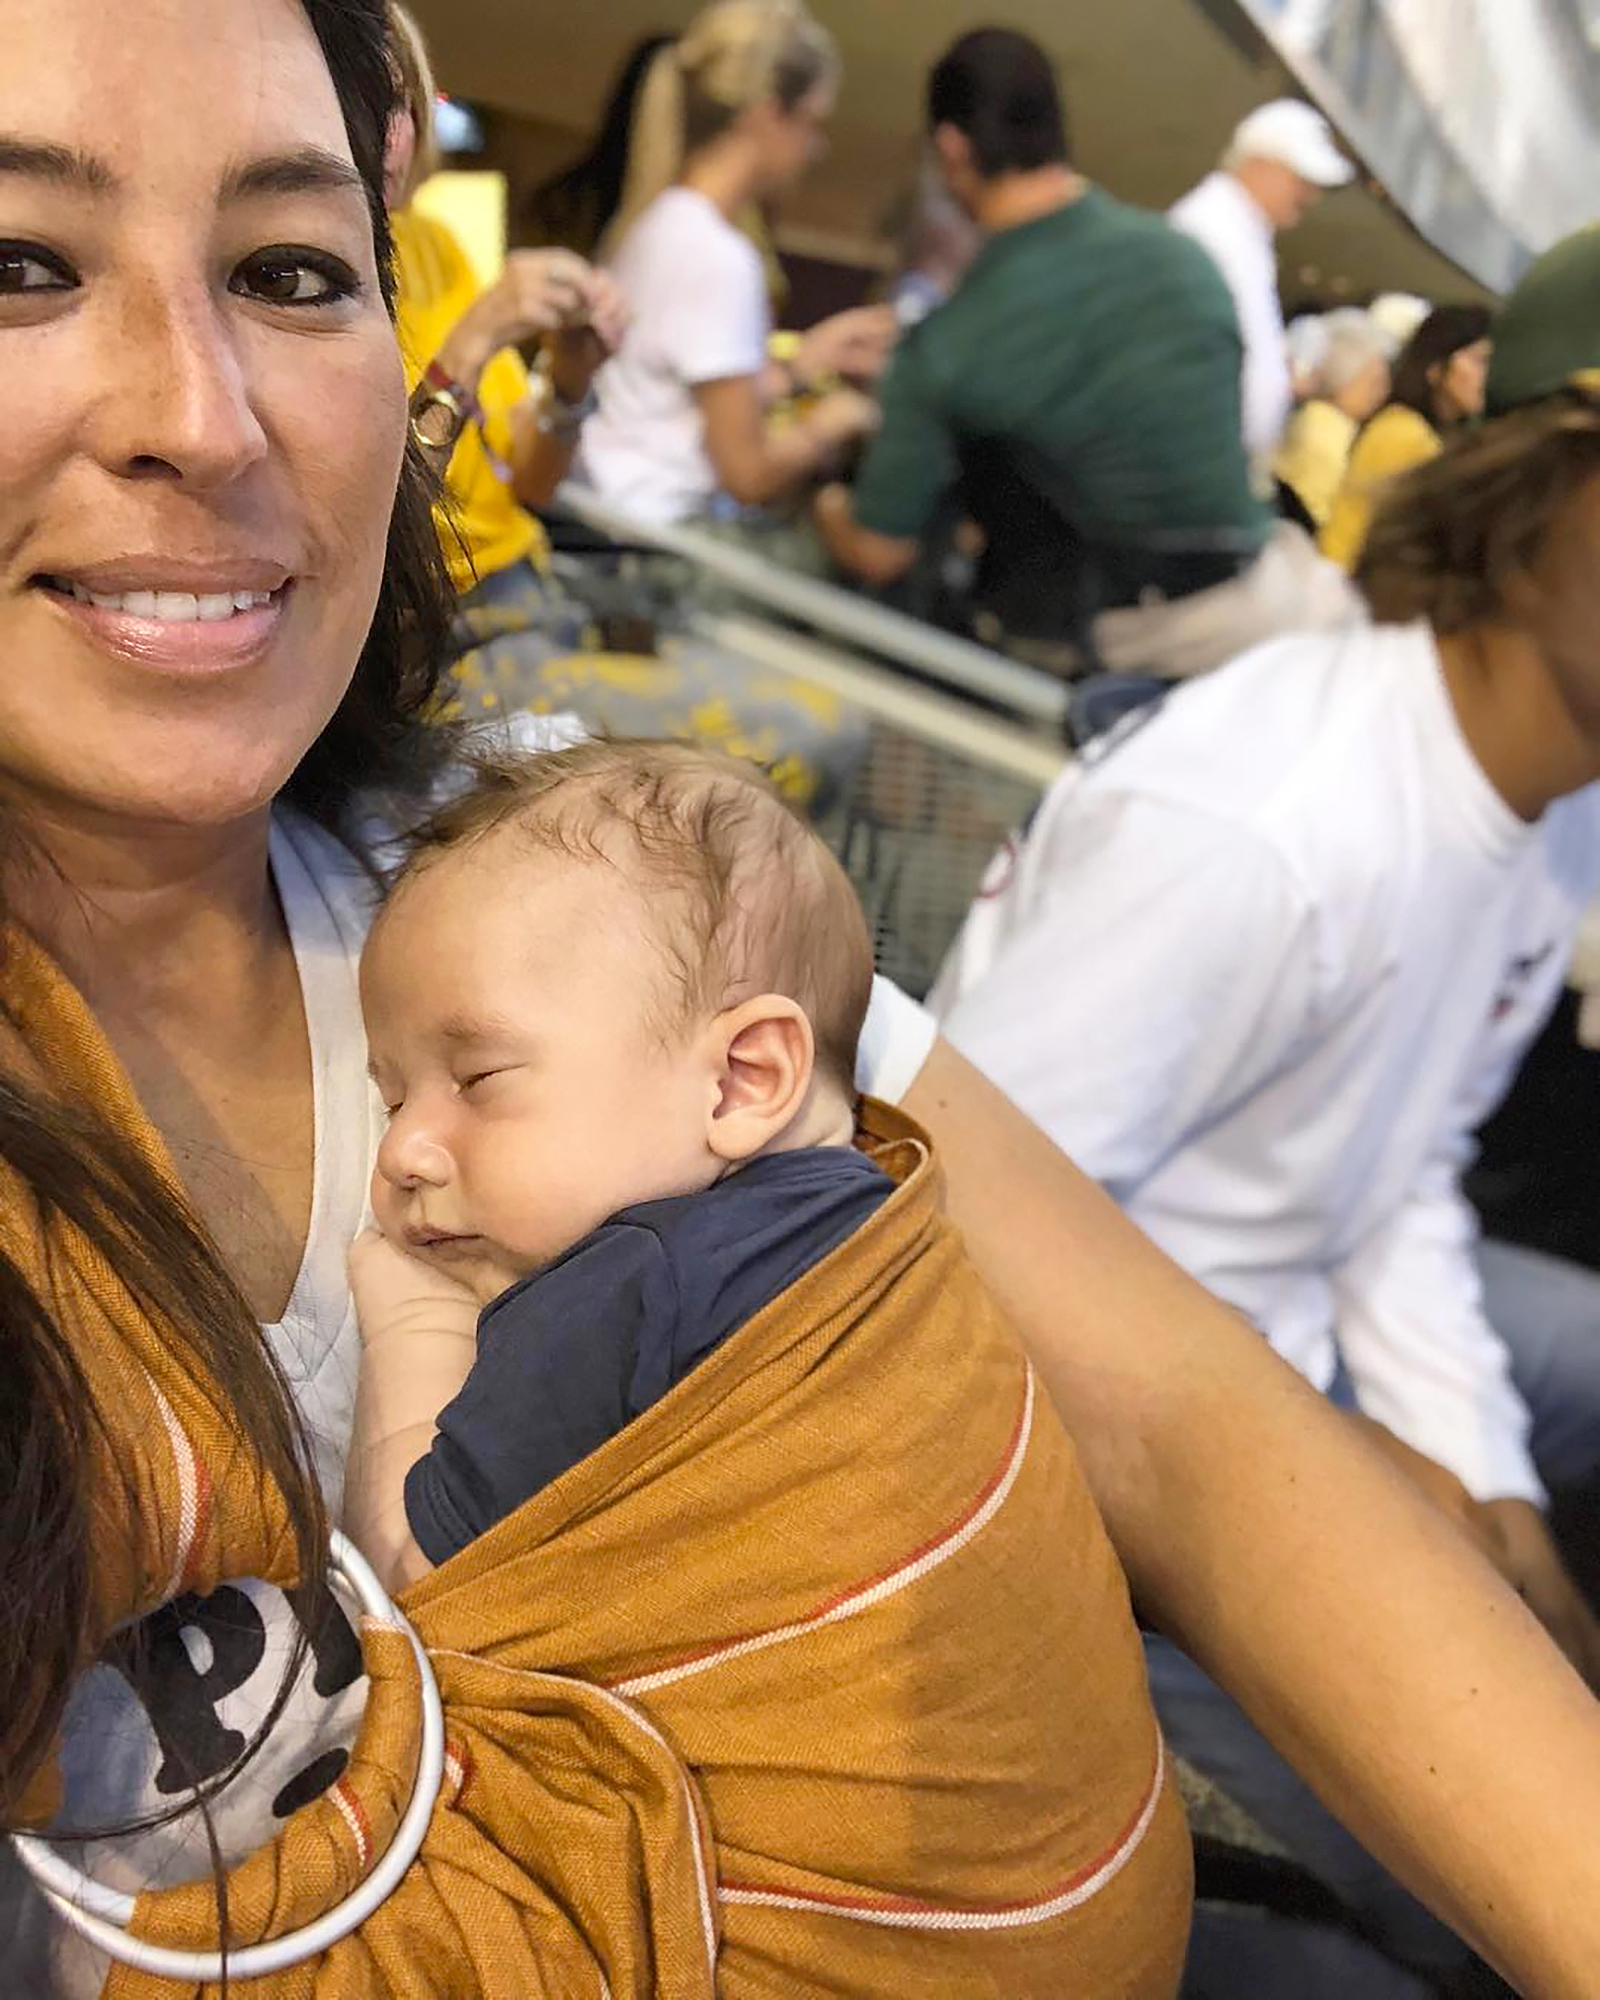 Joanna Gaines Takes Baby Crew Out for His First Football Game Pic